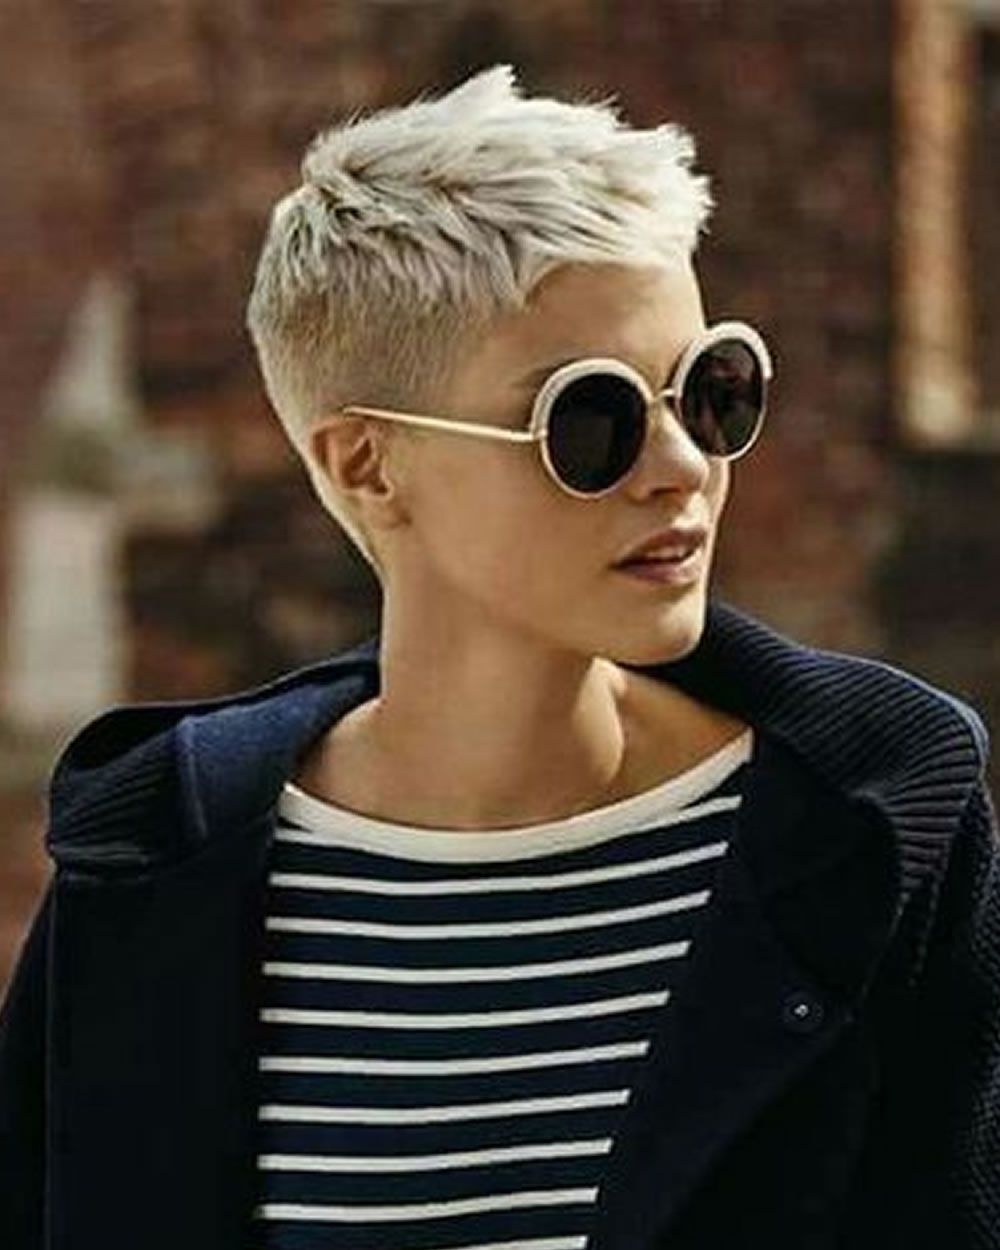 Super Very Short Pixie Haircuts & Hair Colors For 2018 2019 Regarding Most Current Short Pixie Hairstyles (Photo 7 of 15)